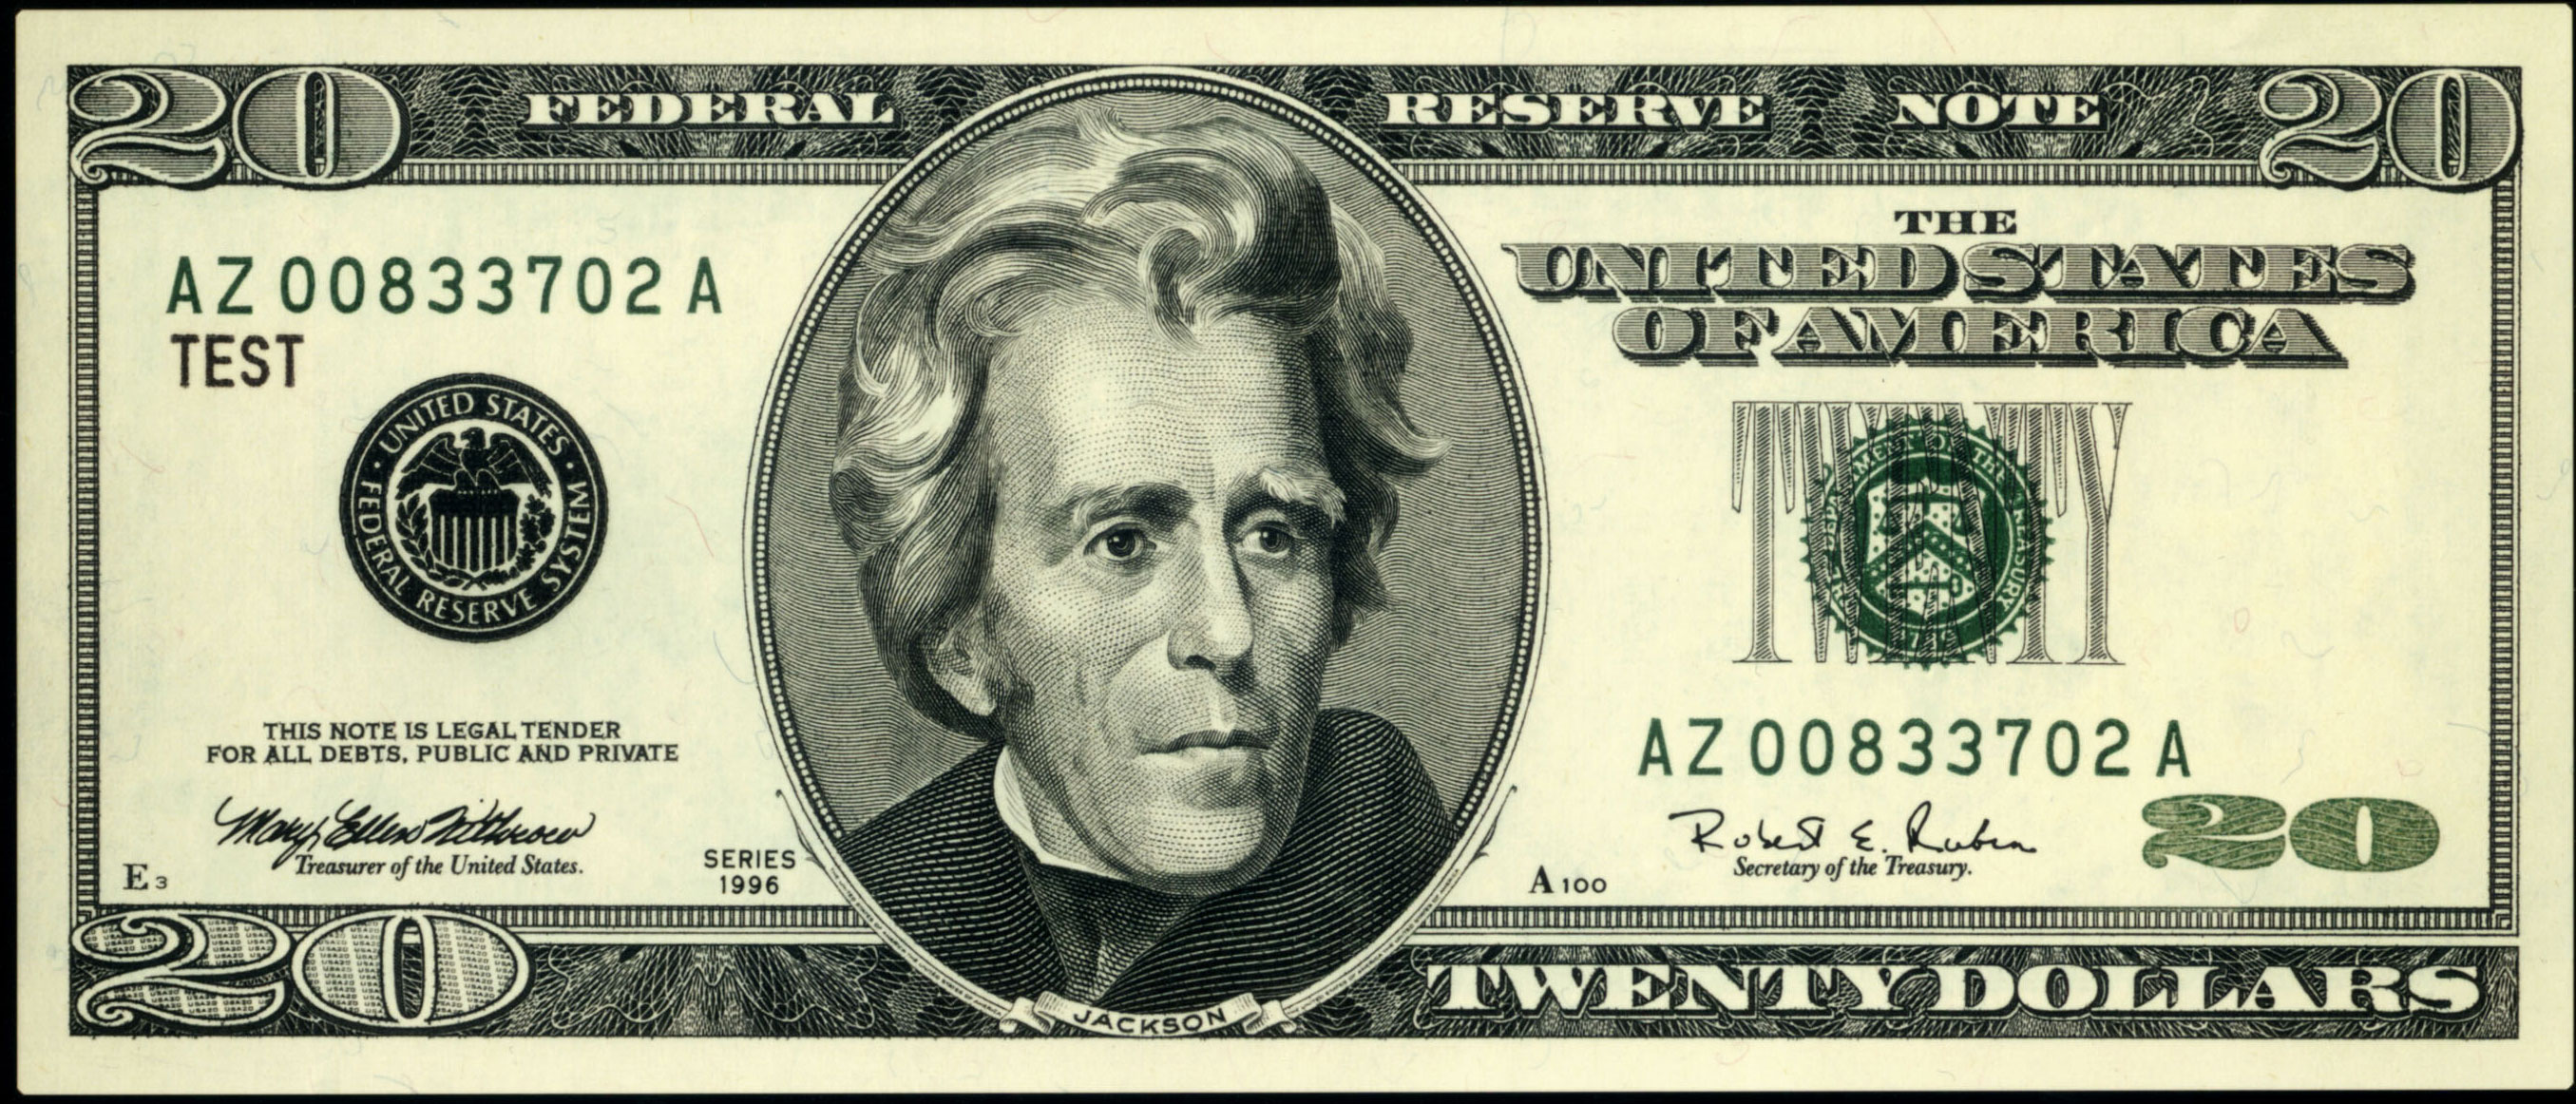 7th President Of The U S  Is On The  20 Bill   Photo By Newsmakers